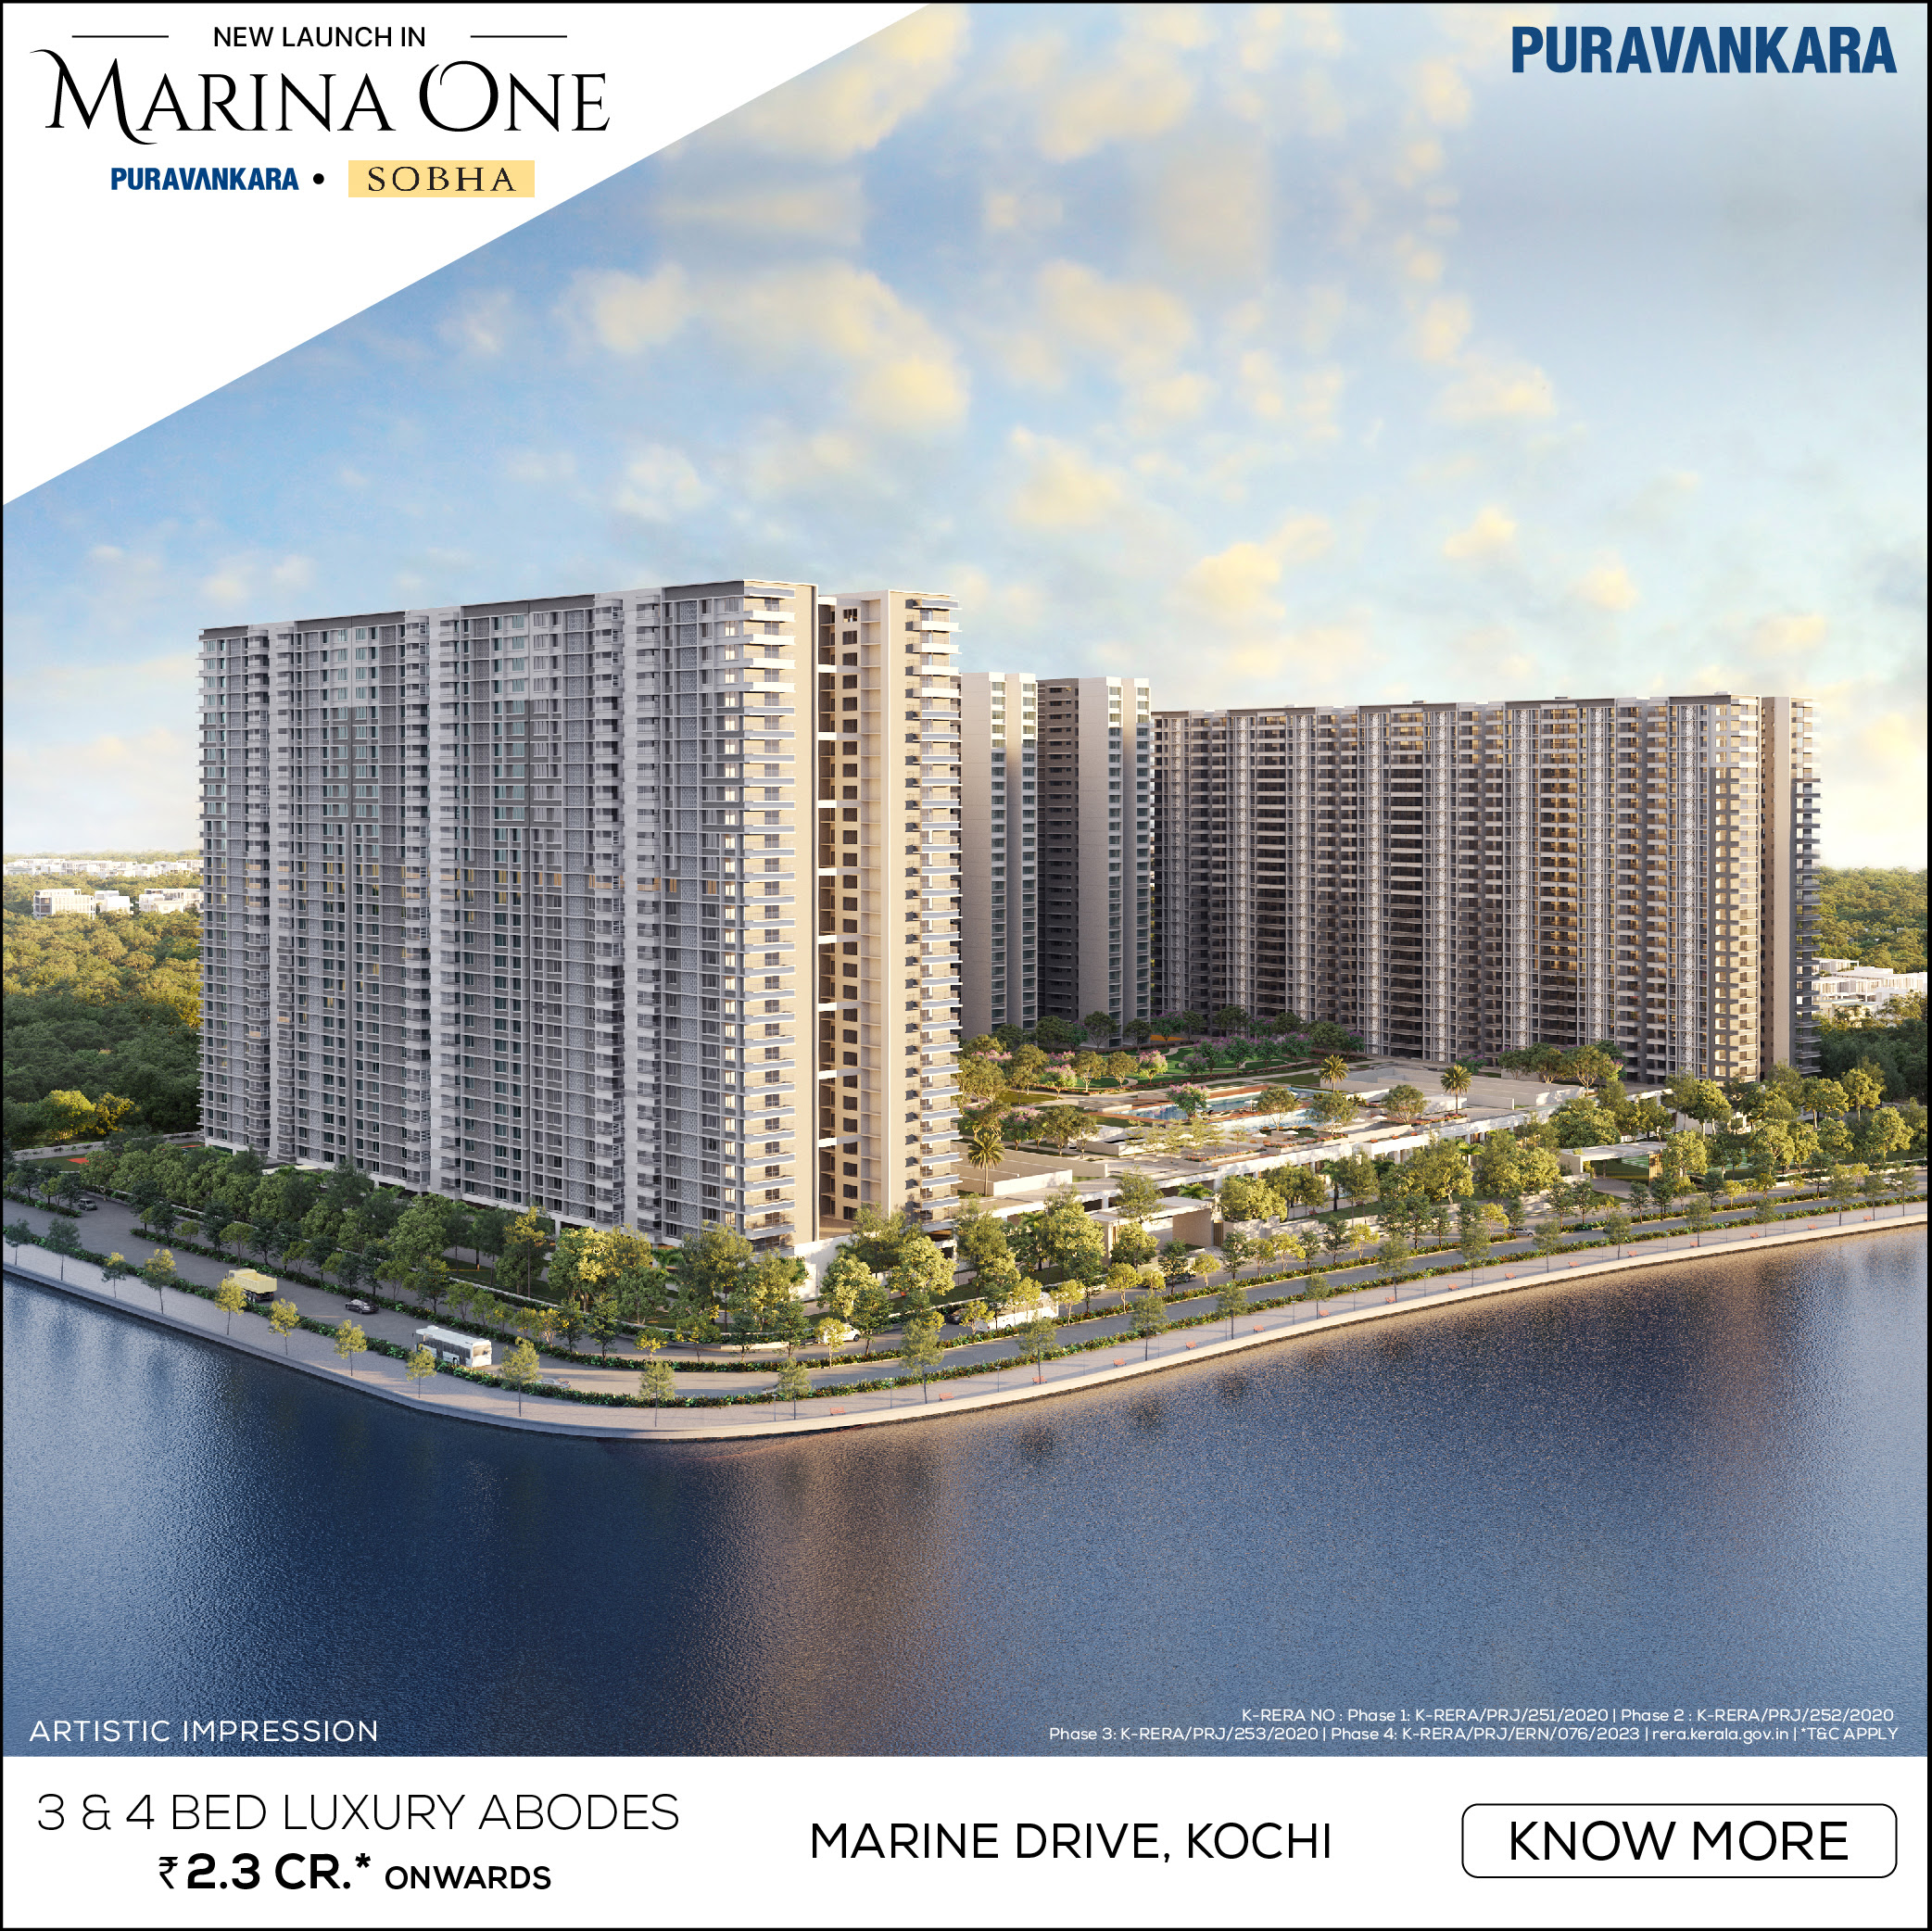 Waterfront residential project Rs 2.3 Cr at Purva Marina One, Kochi Update